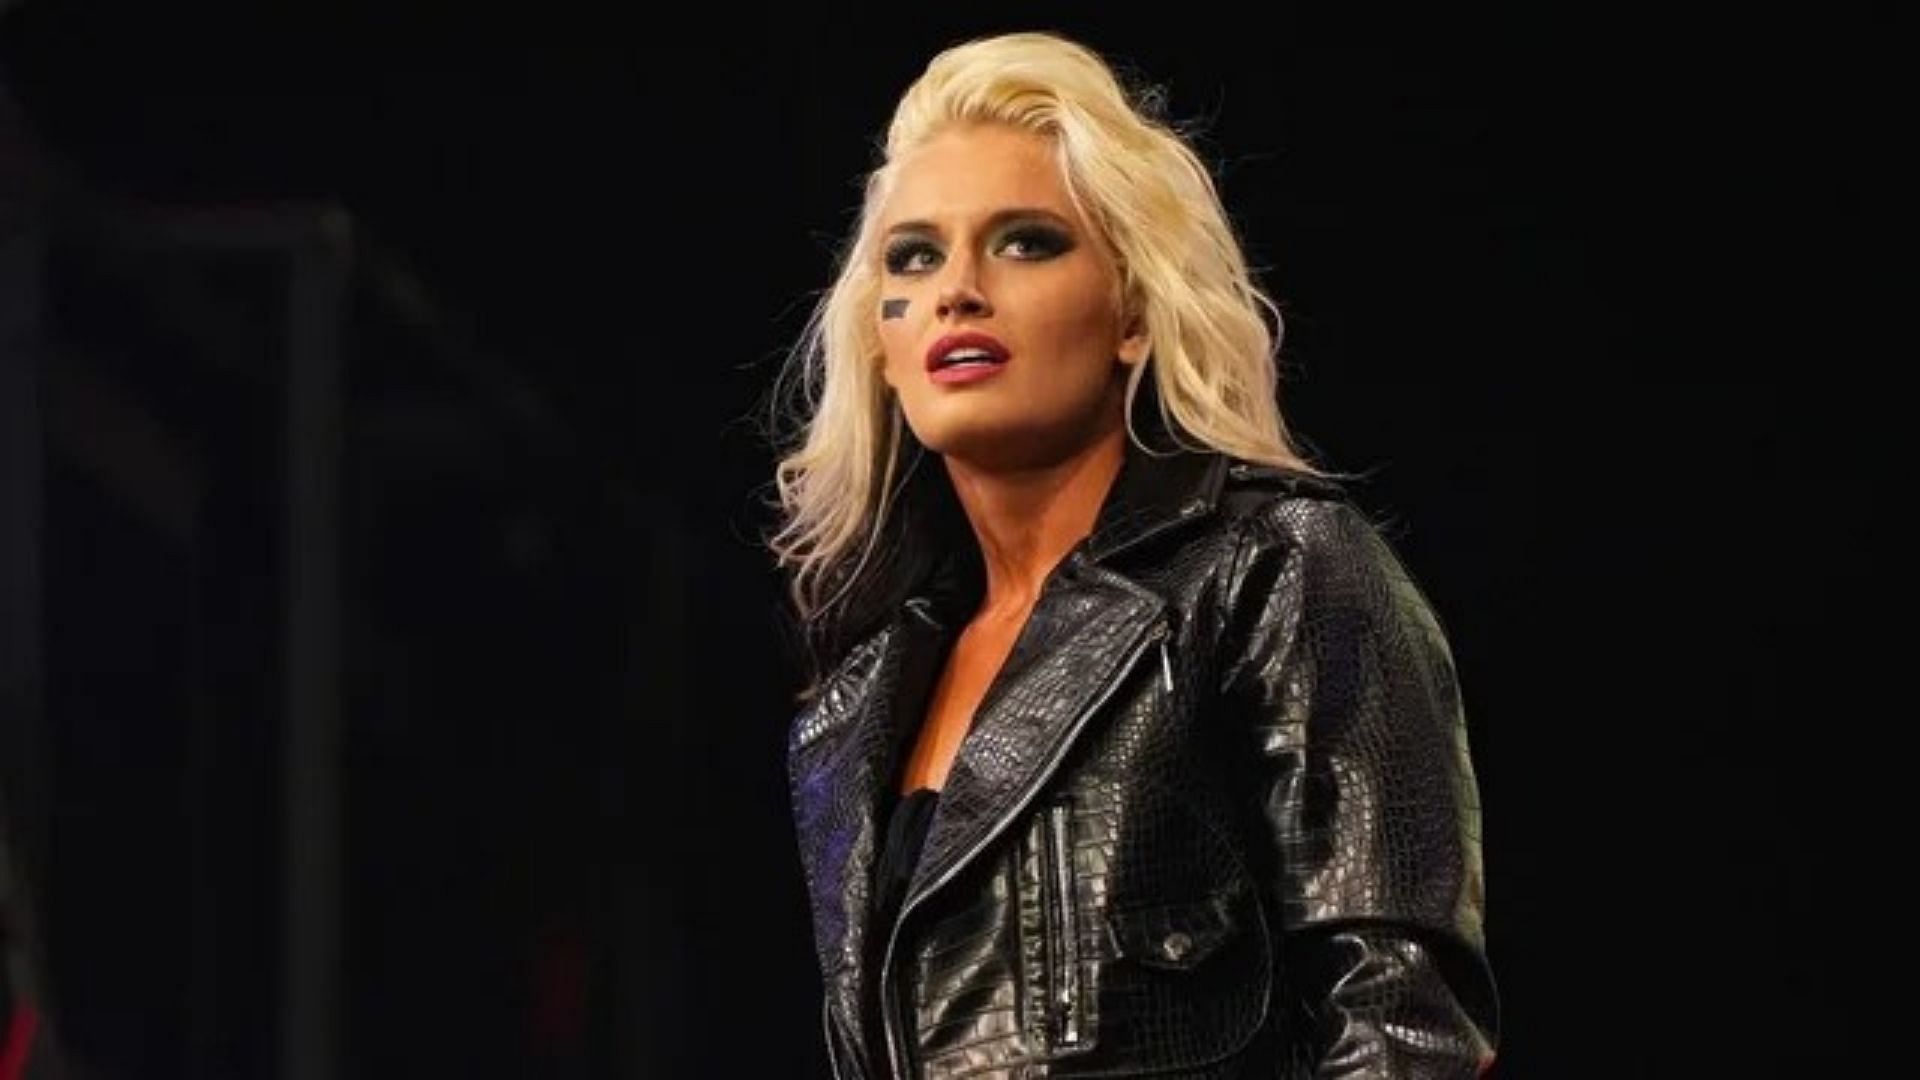 Toni Storm is a former two-time AEW Women